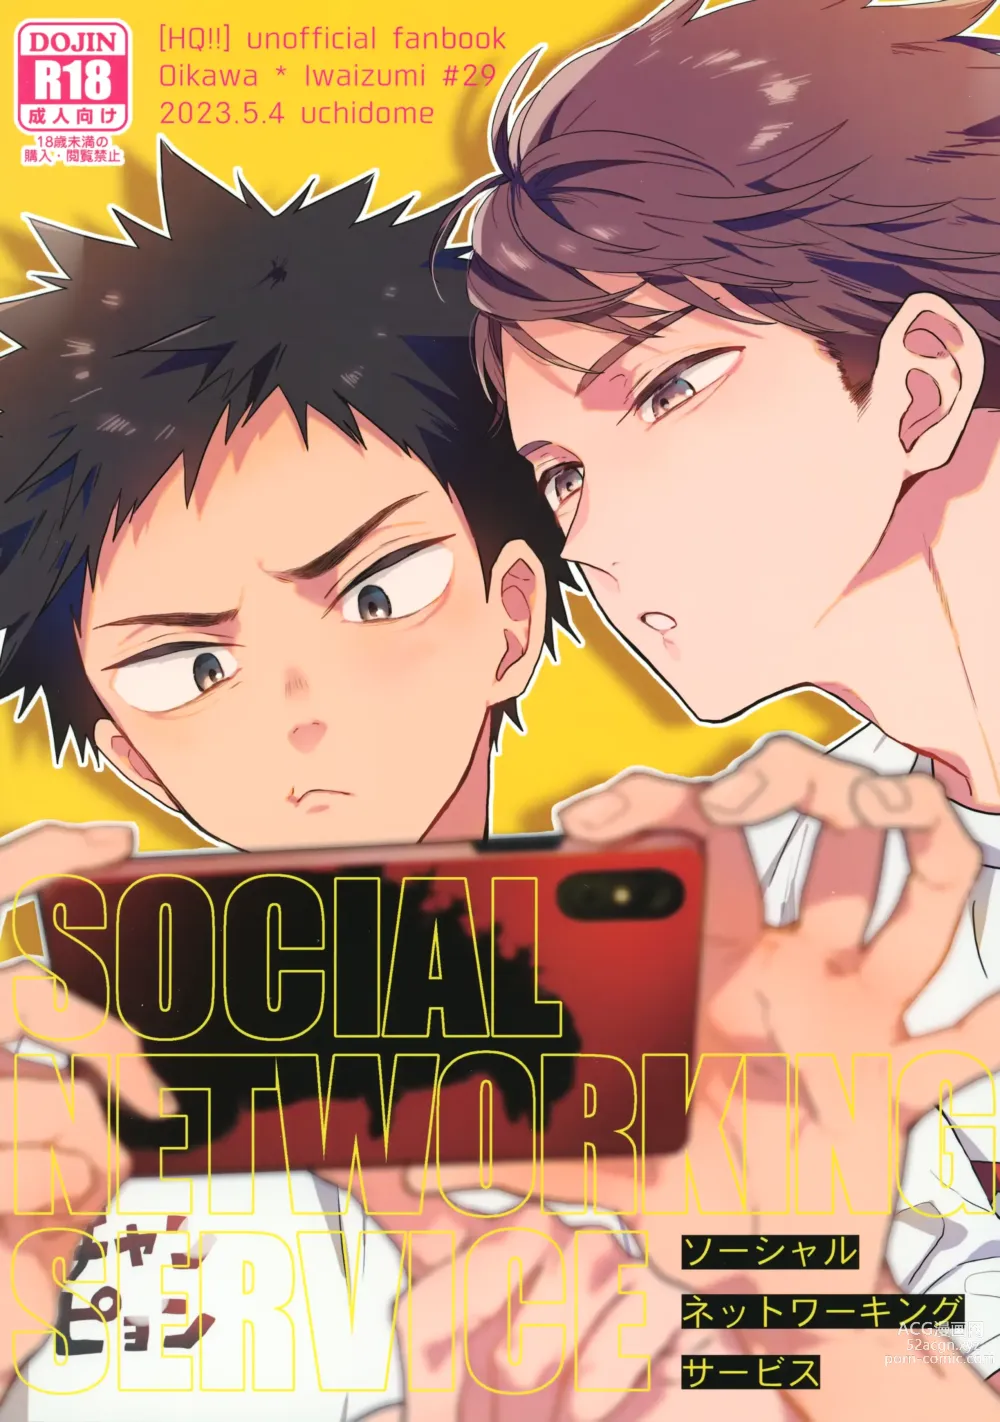 Page 1 of doujinshi SOCIAL NETWORK SERVICE